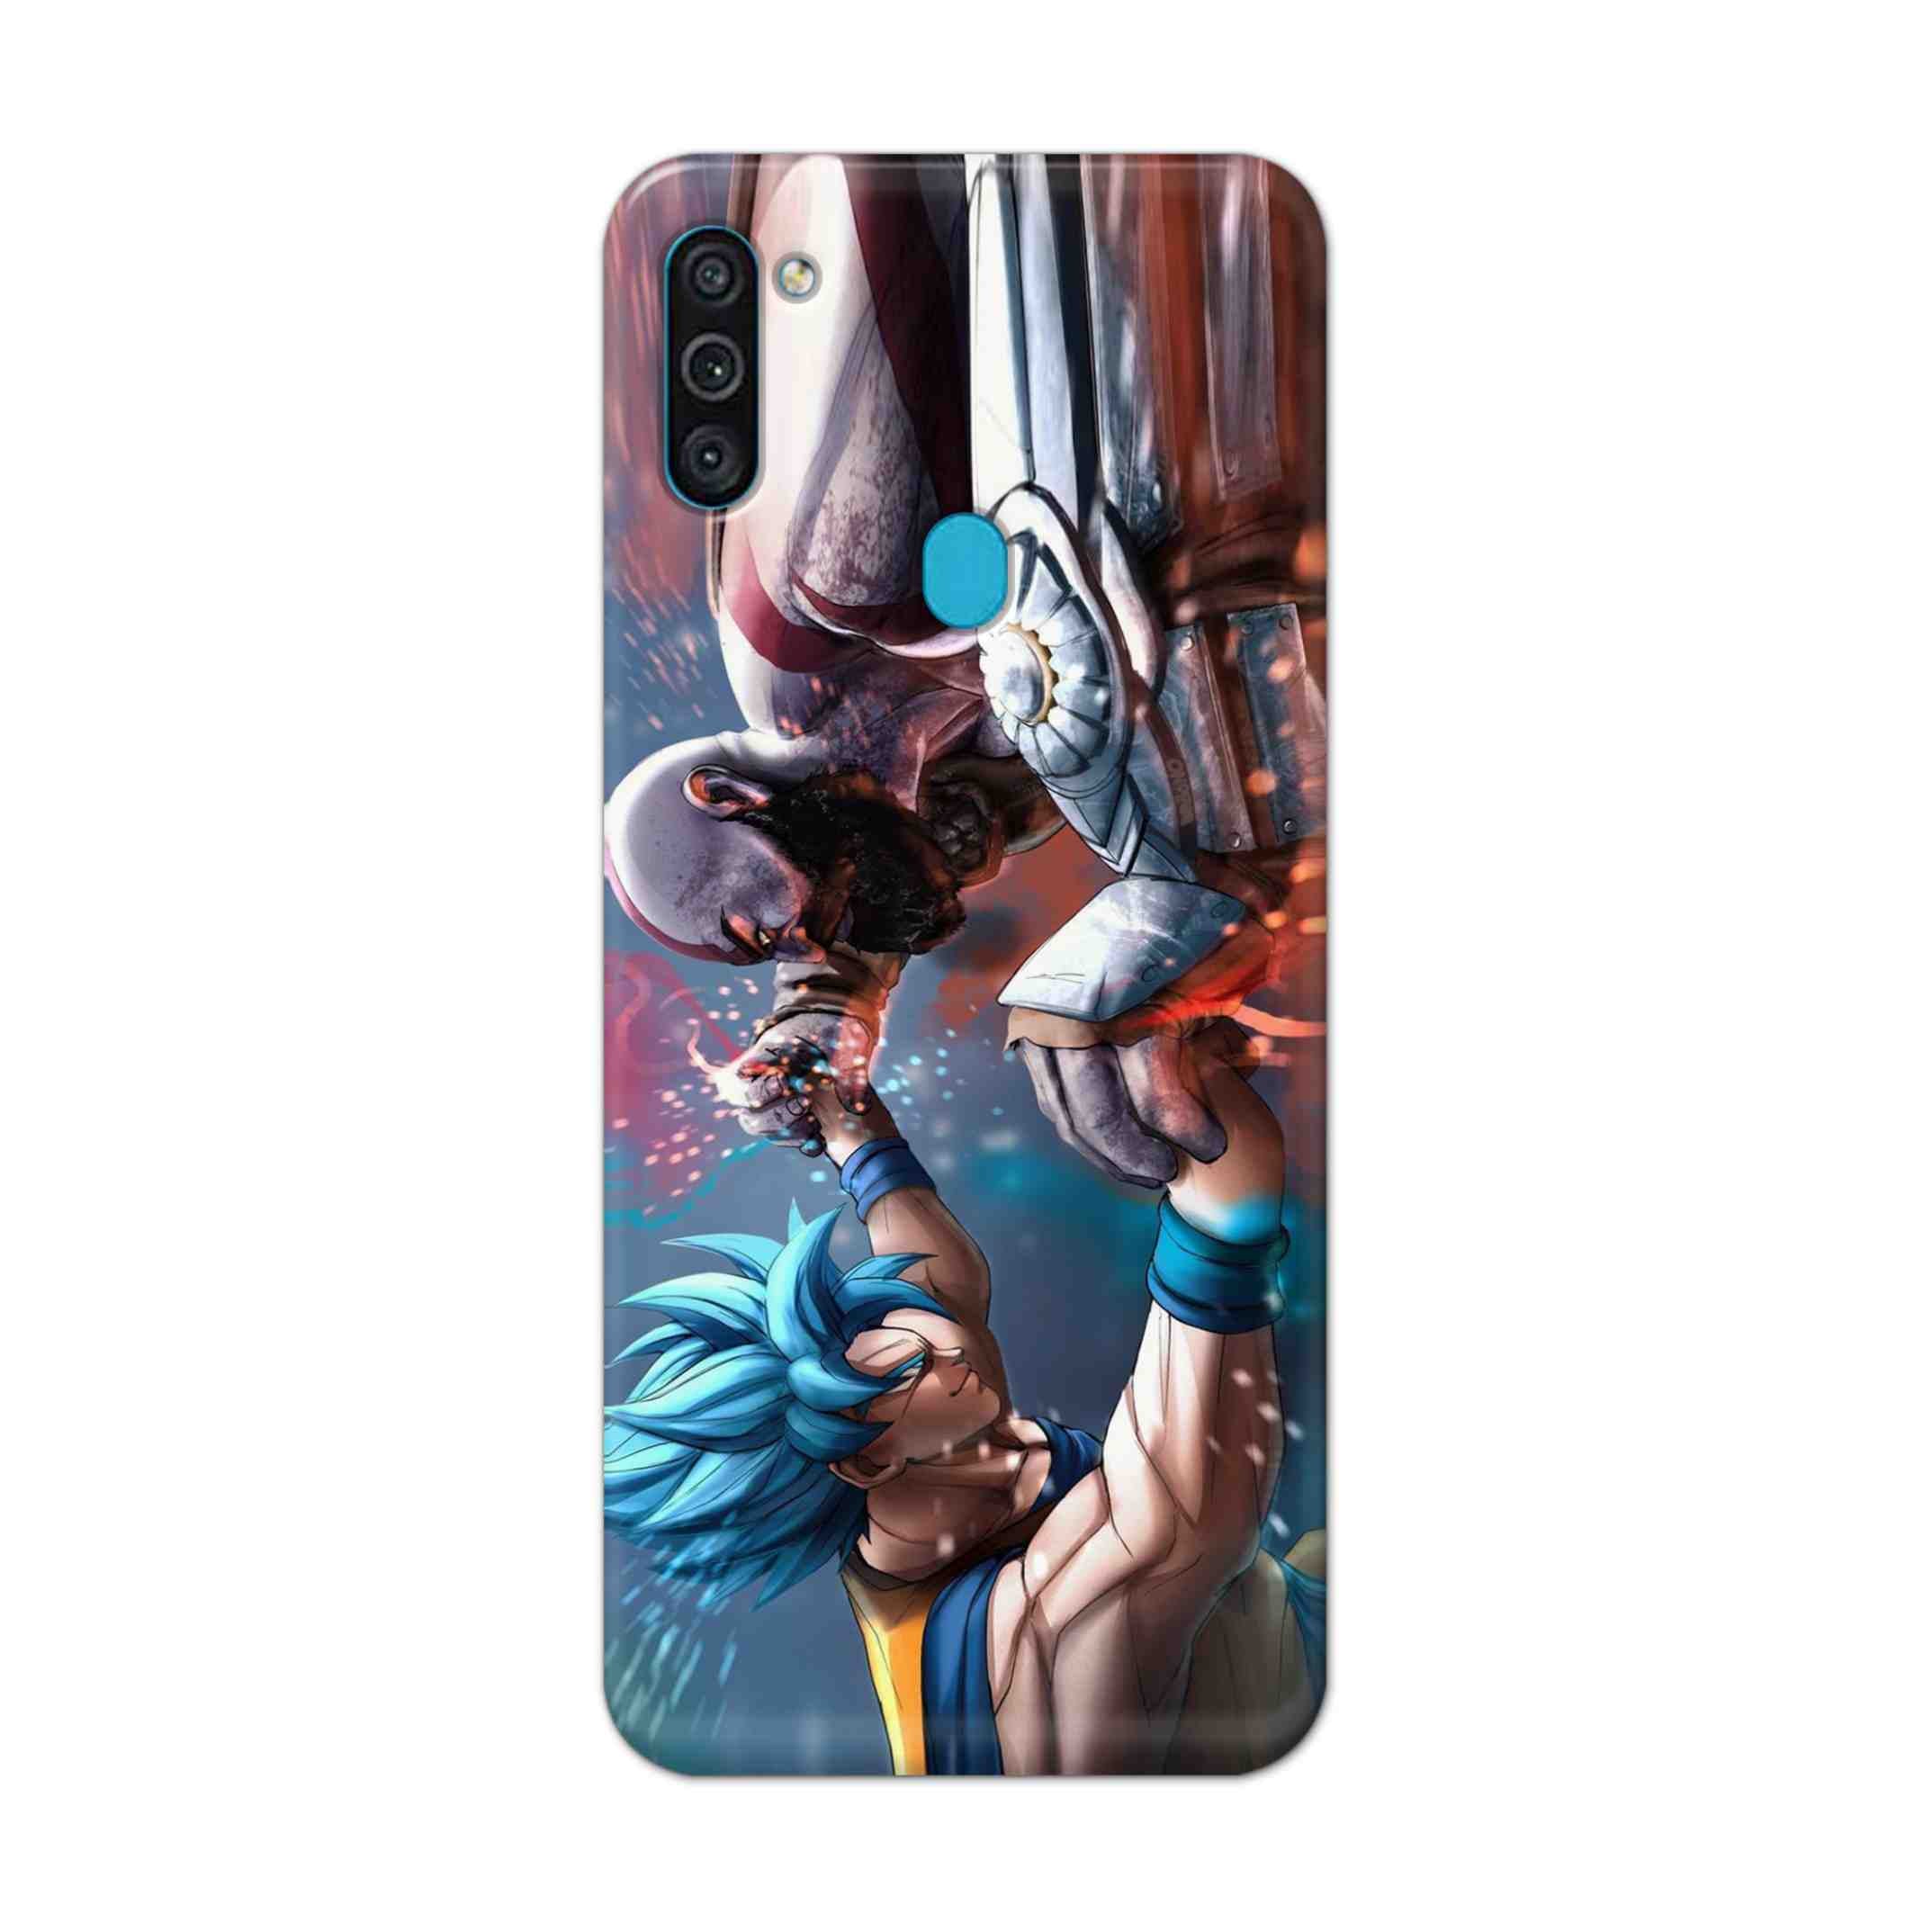 Buy Goku Vs Kratos Hard Back Mobile Phone Case Cover For Samsung Galaxy M11 Online